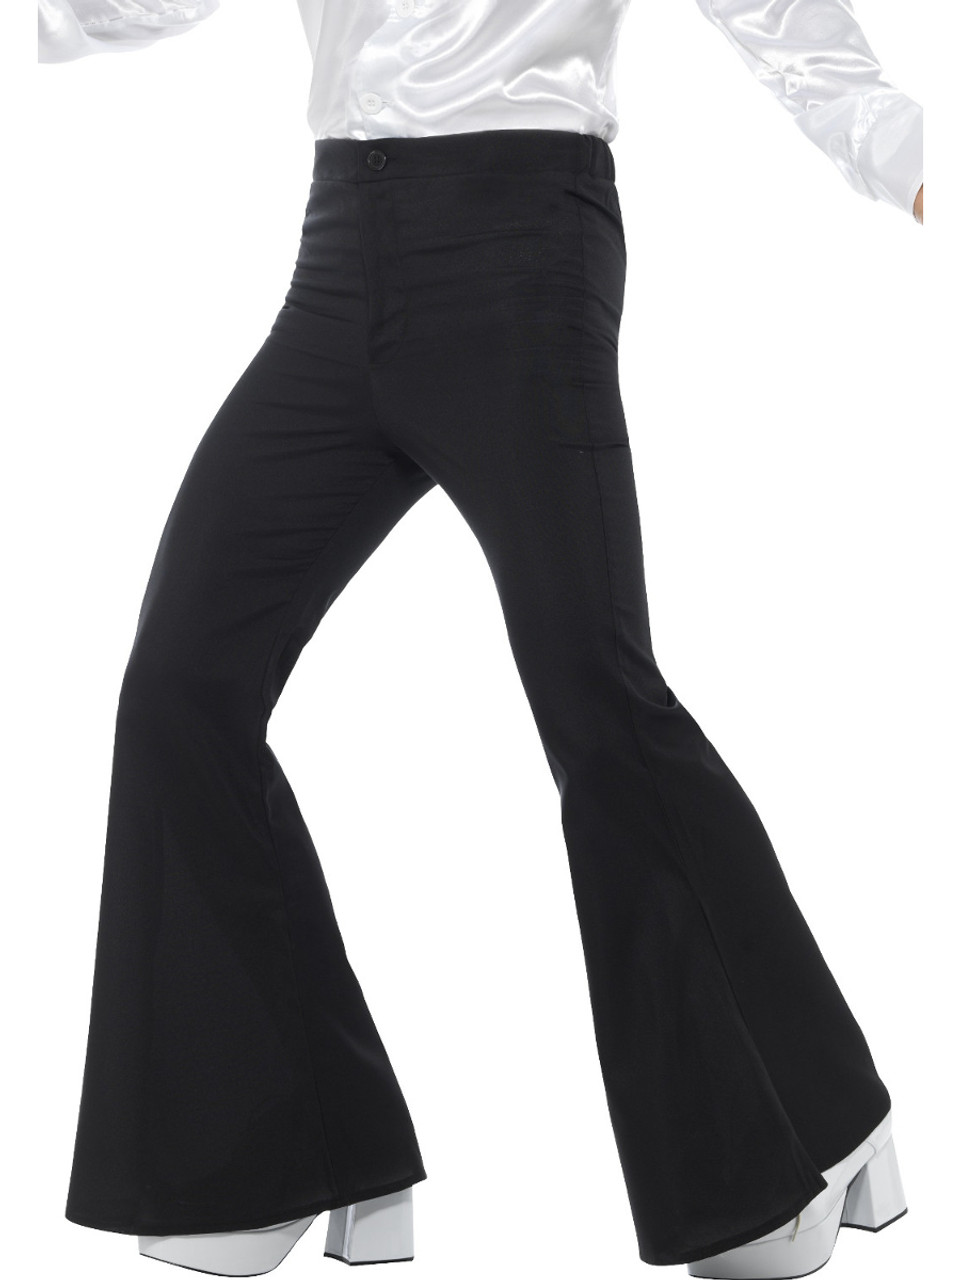  Men's Retro Disco Pants 70S Disco Fashion Fever Solid Black  Flared Pants Vintage Trousers Bell Bottoms Outfit (Black, Small) :  Clothing, Shoes & Jewelry